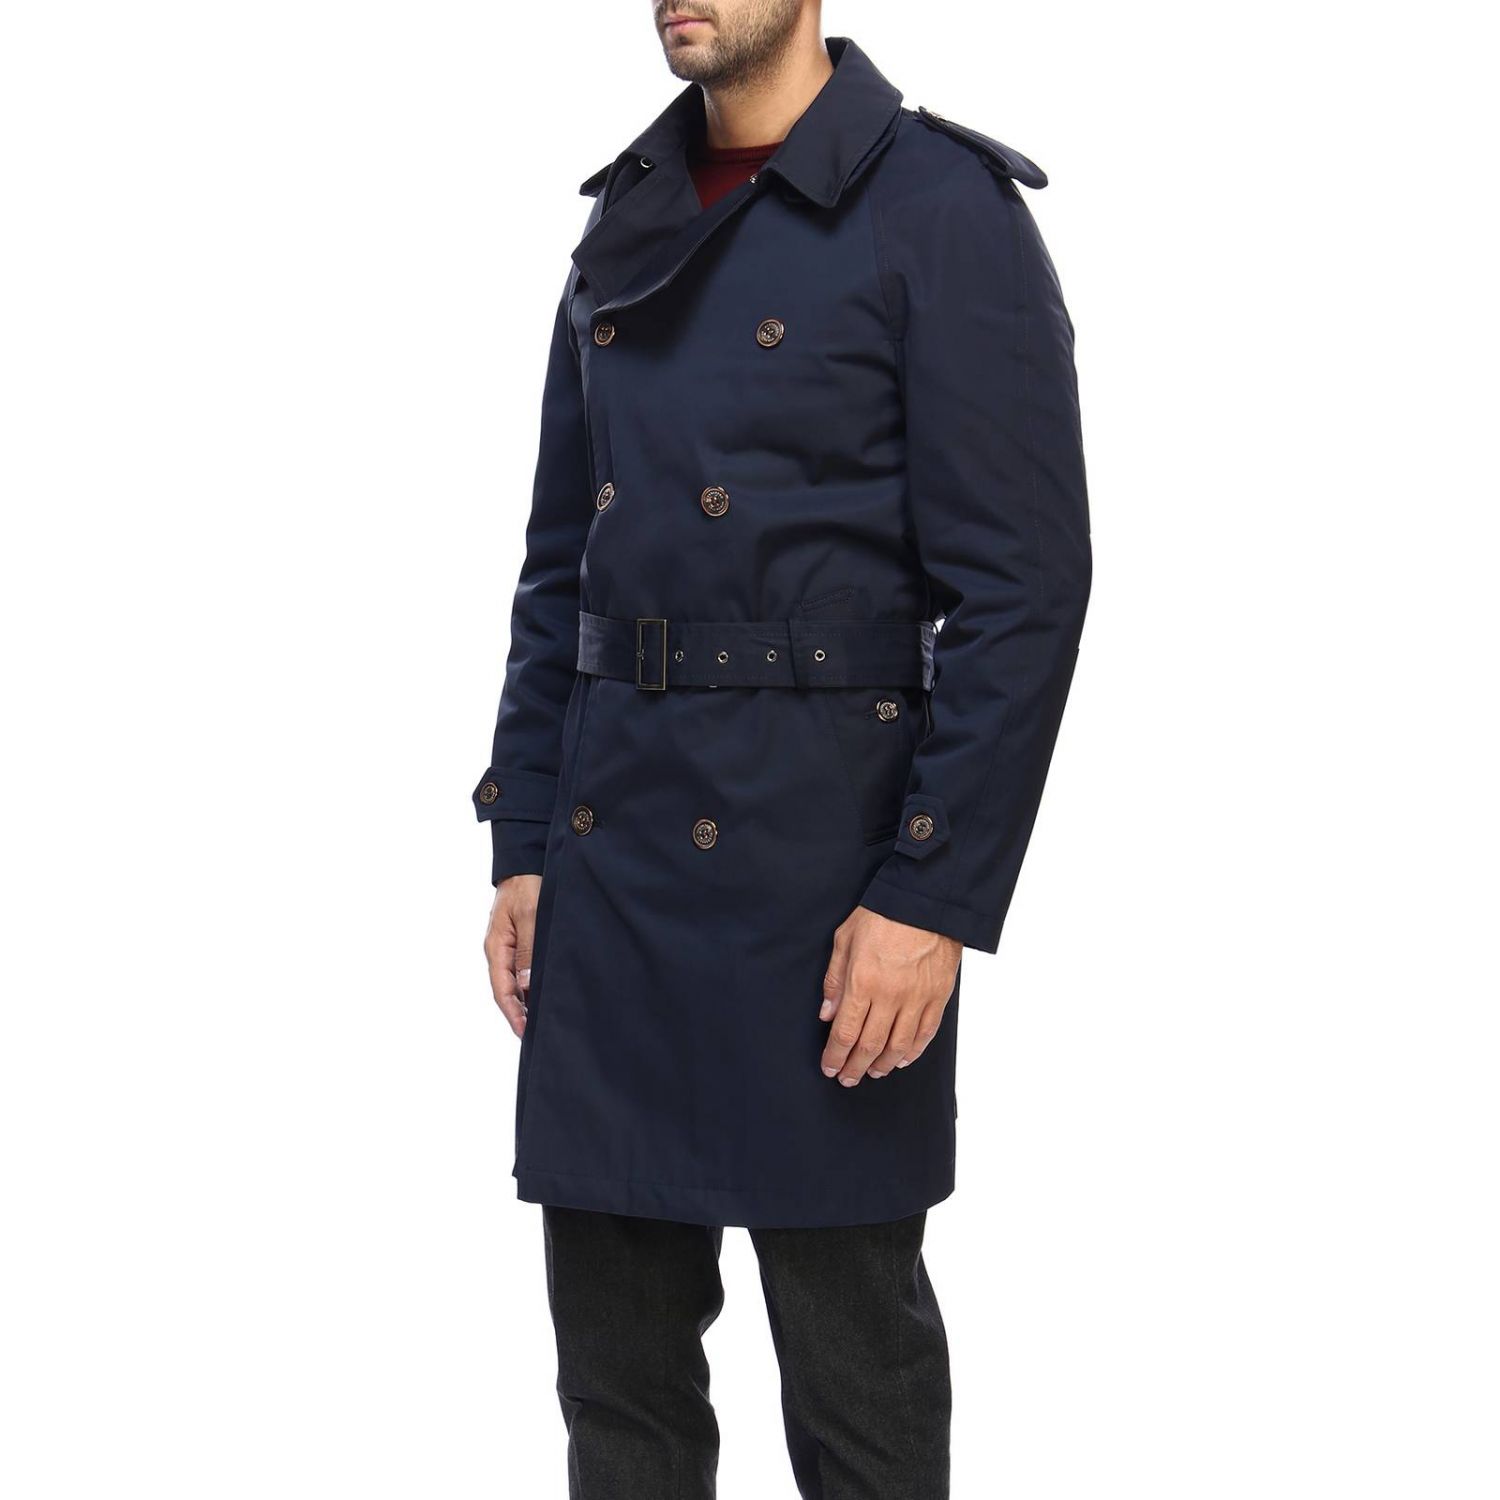 Alessandro Dell'acqua Outlet: Trench Coat men - Blue | Trench Coat ...